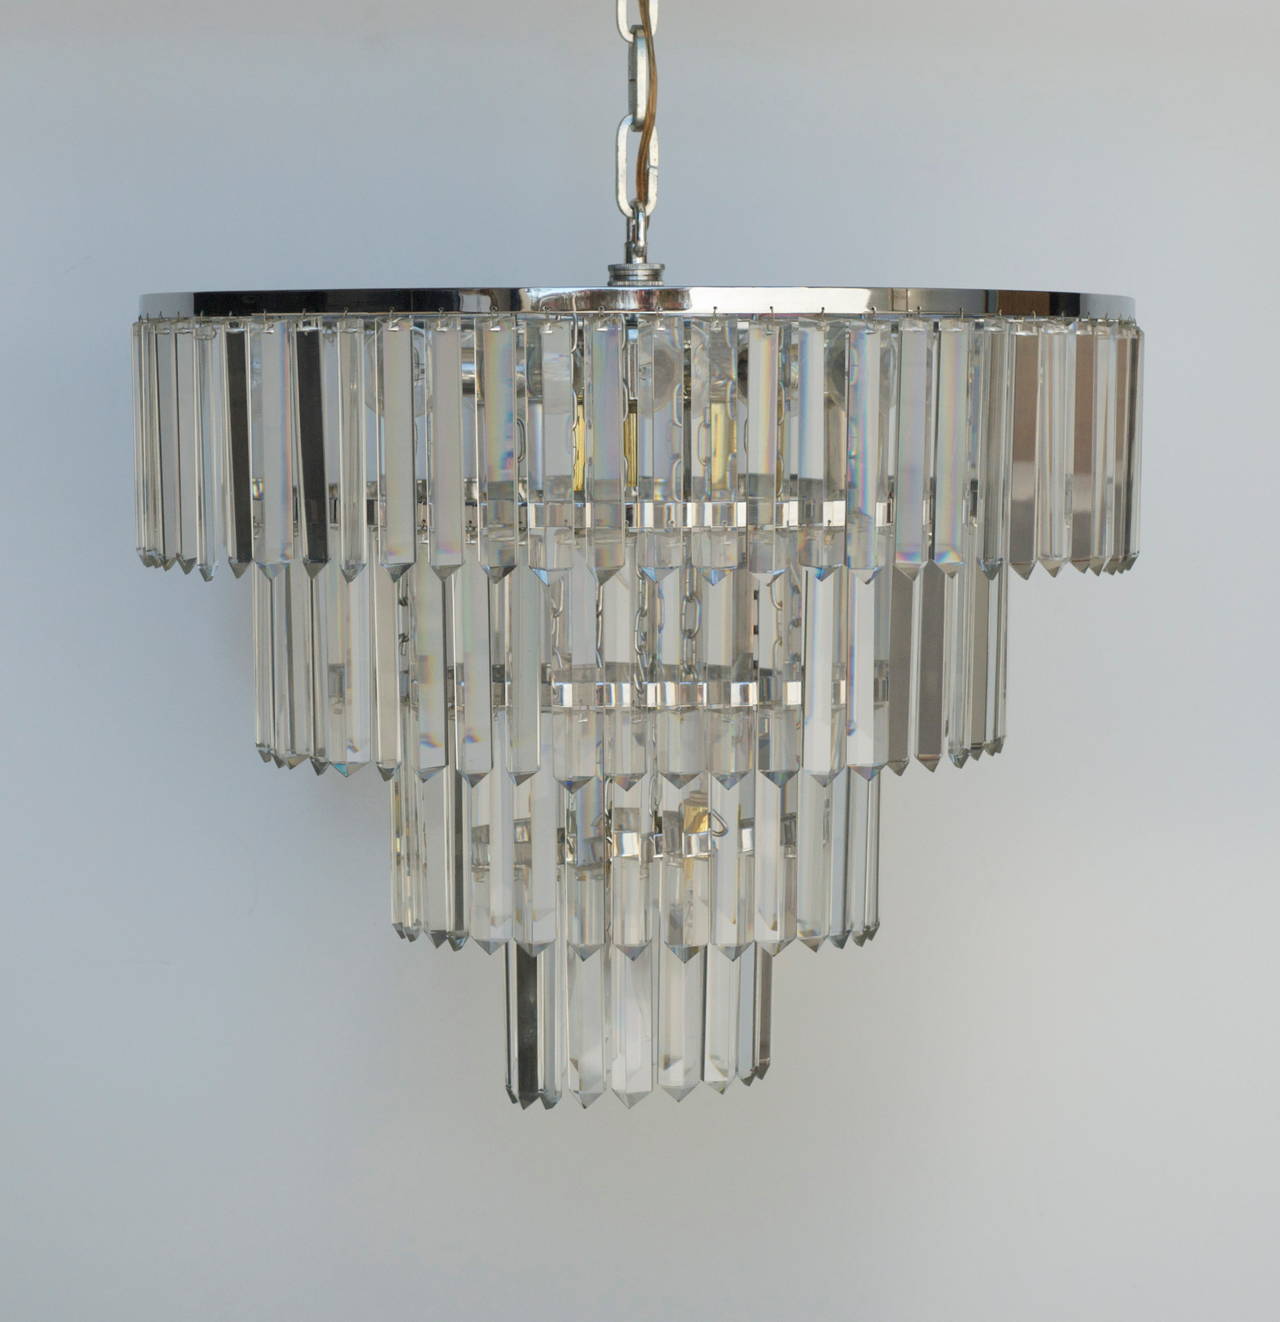 A beautiful vintage chandelier in excellent condition with four tiers of glass prisms mounted on a mixed metal frame of chrome with brass fittings.
There are six Sputnik lights and six hanging light for a total of 12 lights in all. There is 17